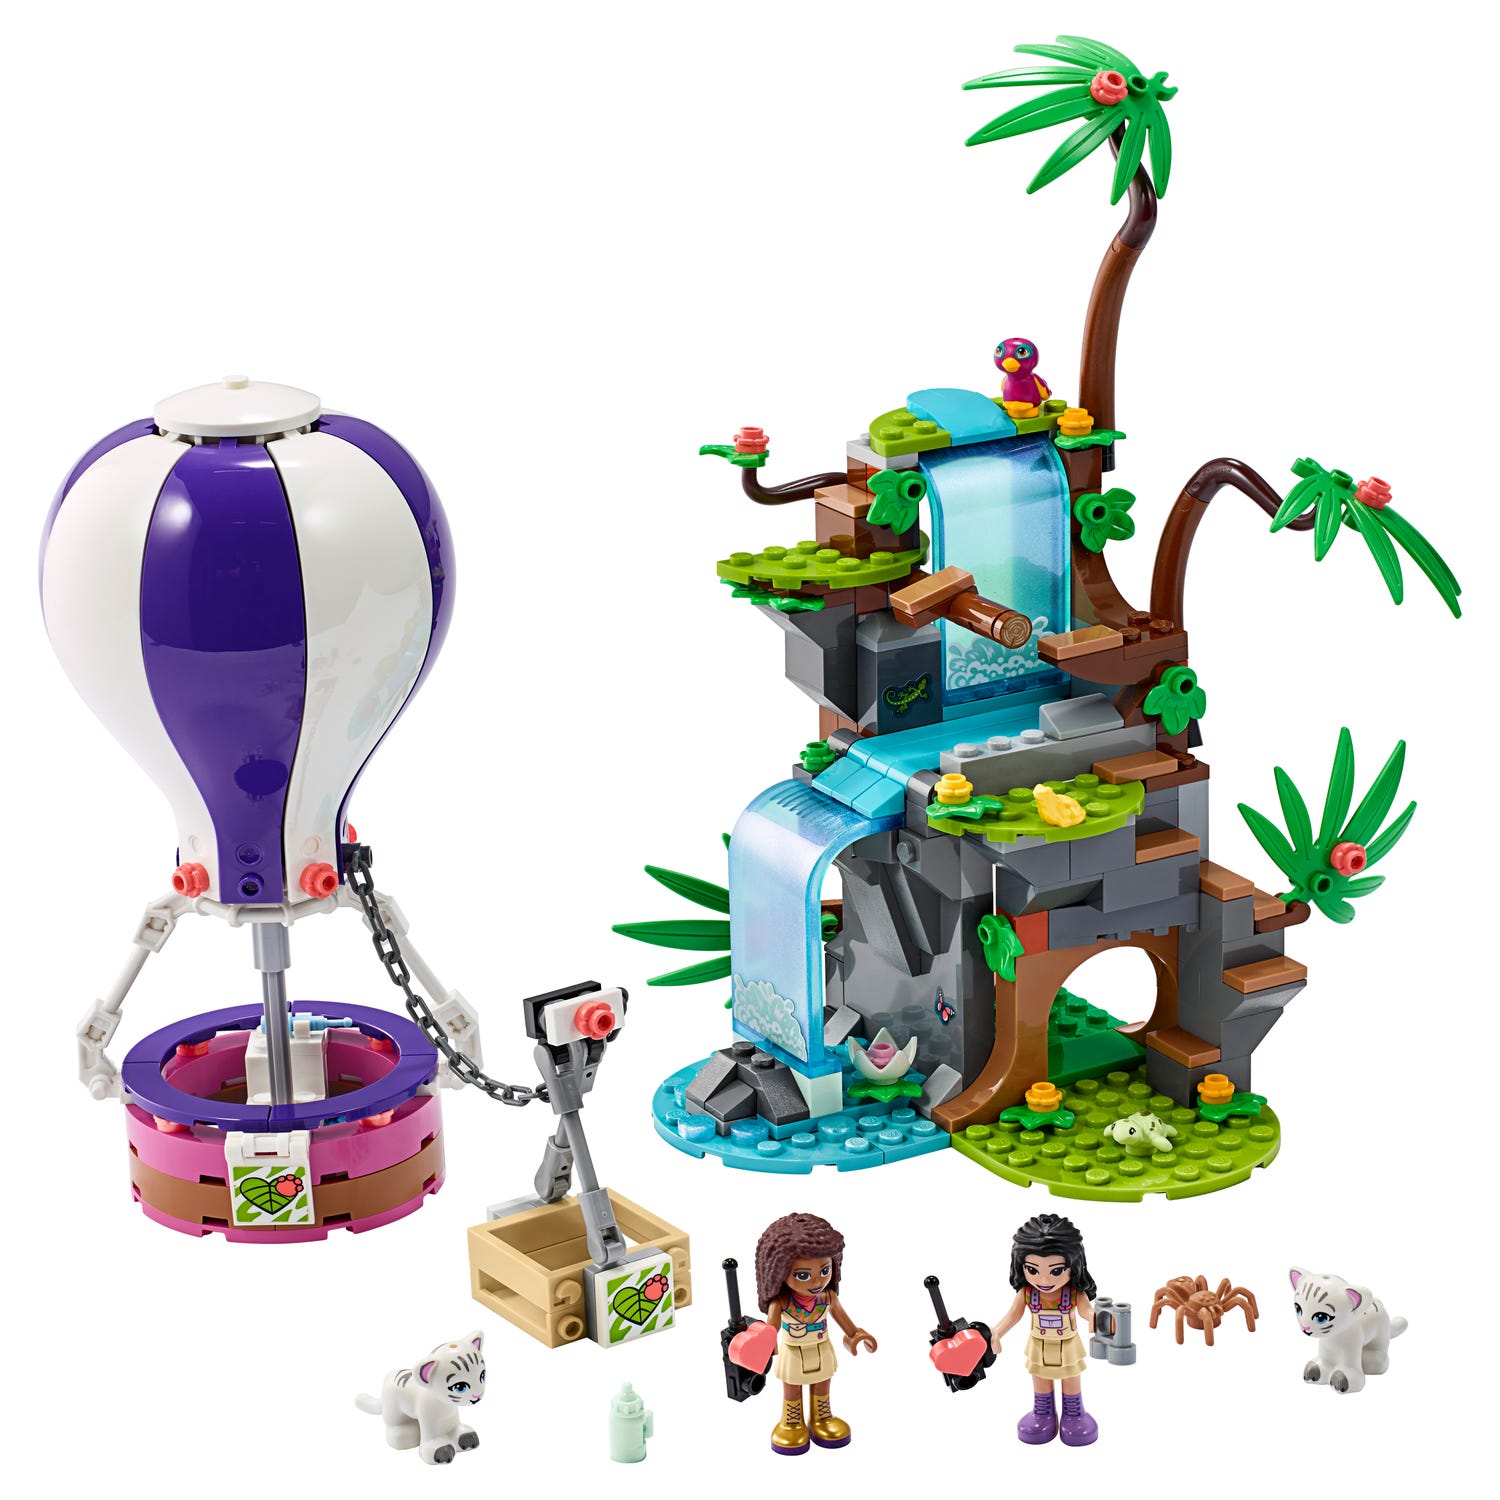 Tiger Hot Air Balloon Jungle Rescue 41423 | Friends | Buy online at the Official LEGOÂ® Shop US